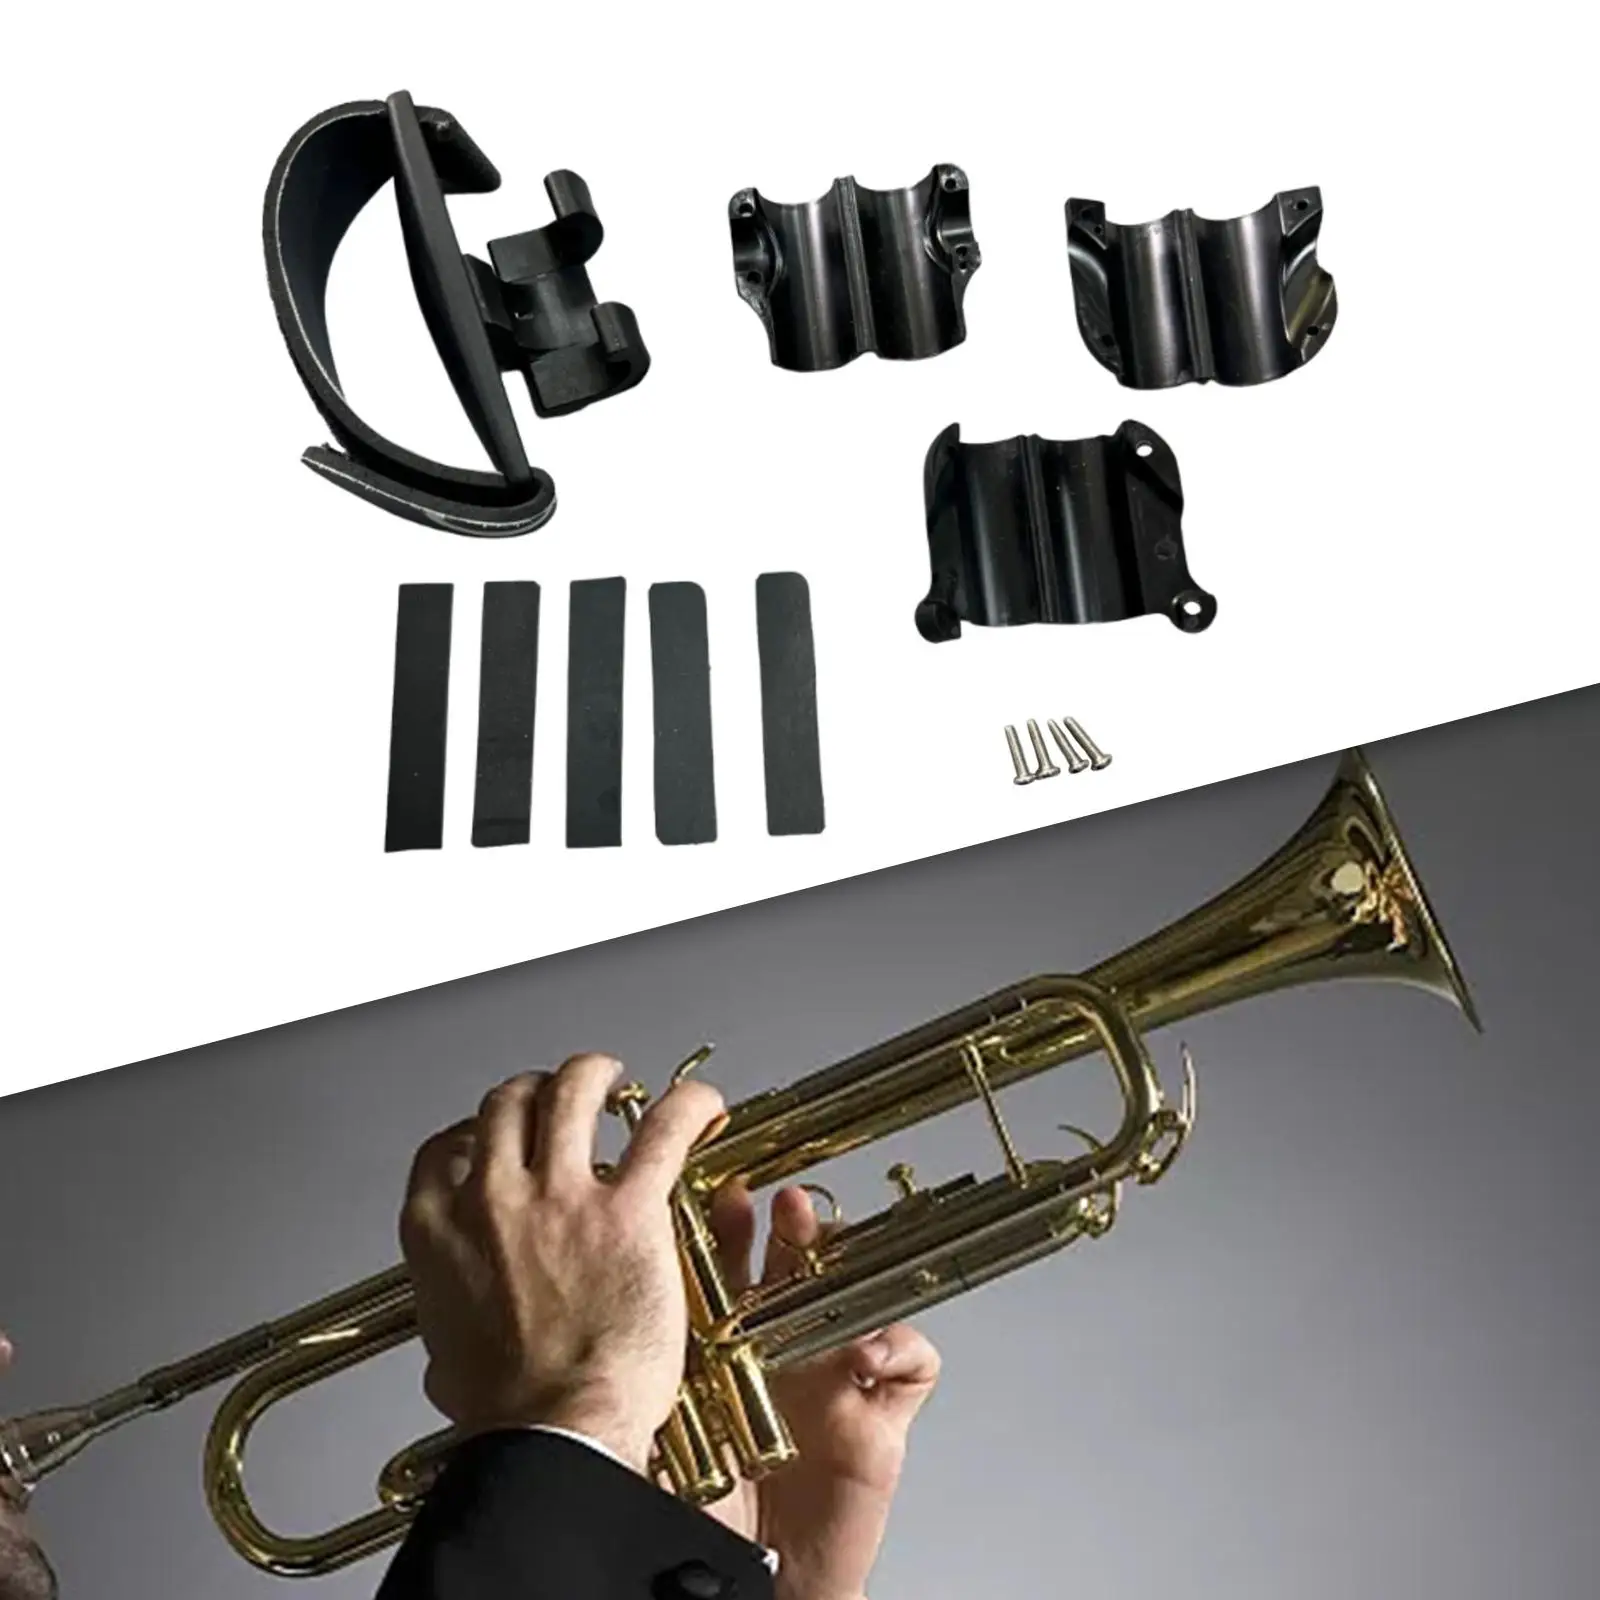 Trombone Grip Can Balance The Instrument Protection Attachments Musician Gifts Cleaning Care Accessories with Screws and Straps